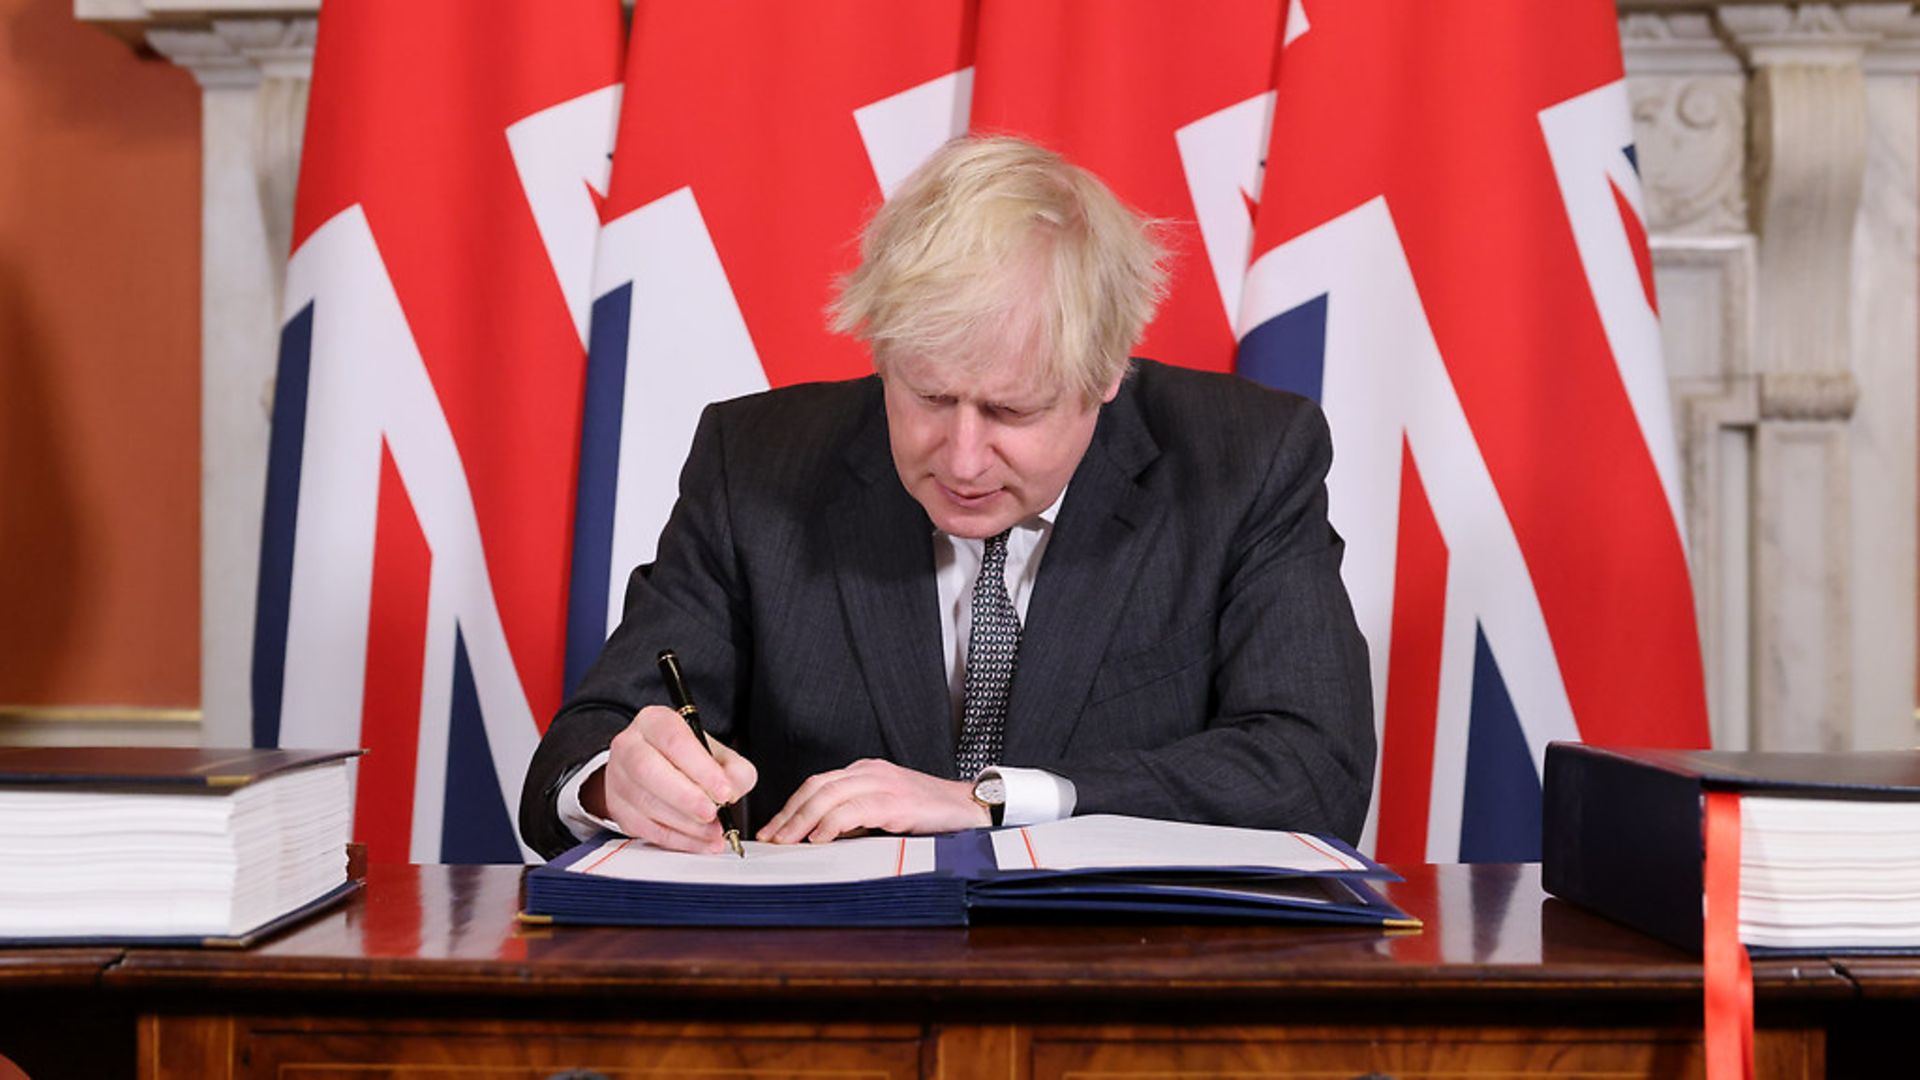 Boris Johnson signs the Brexit agreement - Credit: Andrew Parsons / No10 Downing St